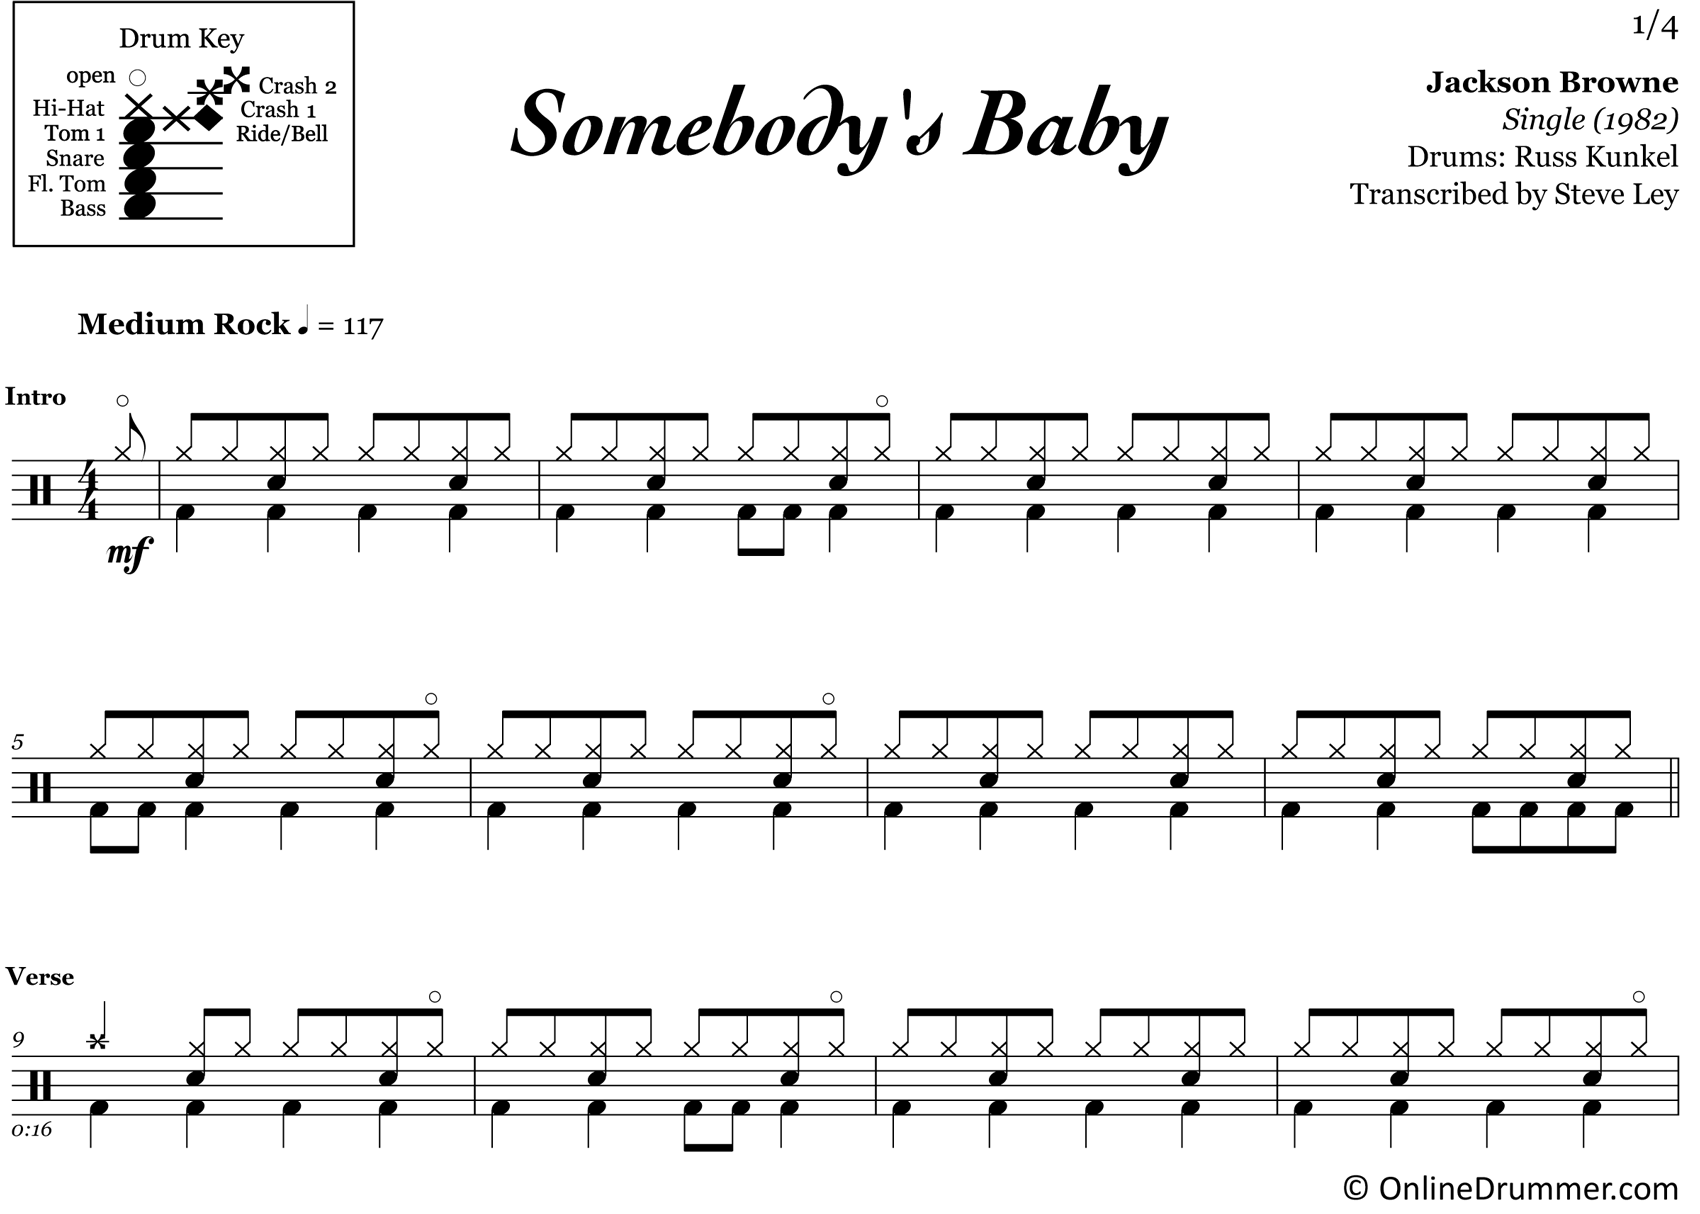 Drum Sheet Music for Somebody's Baby by Jackson Browne